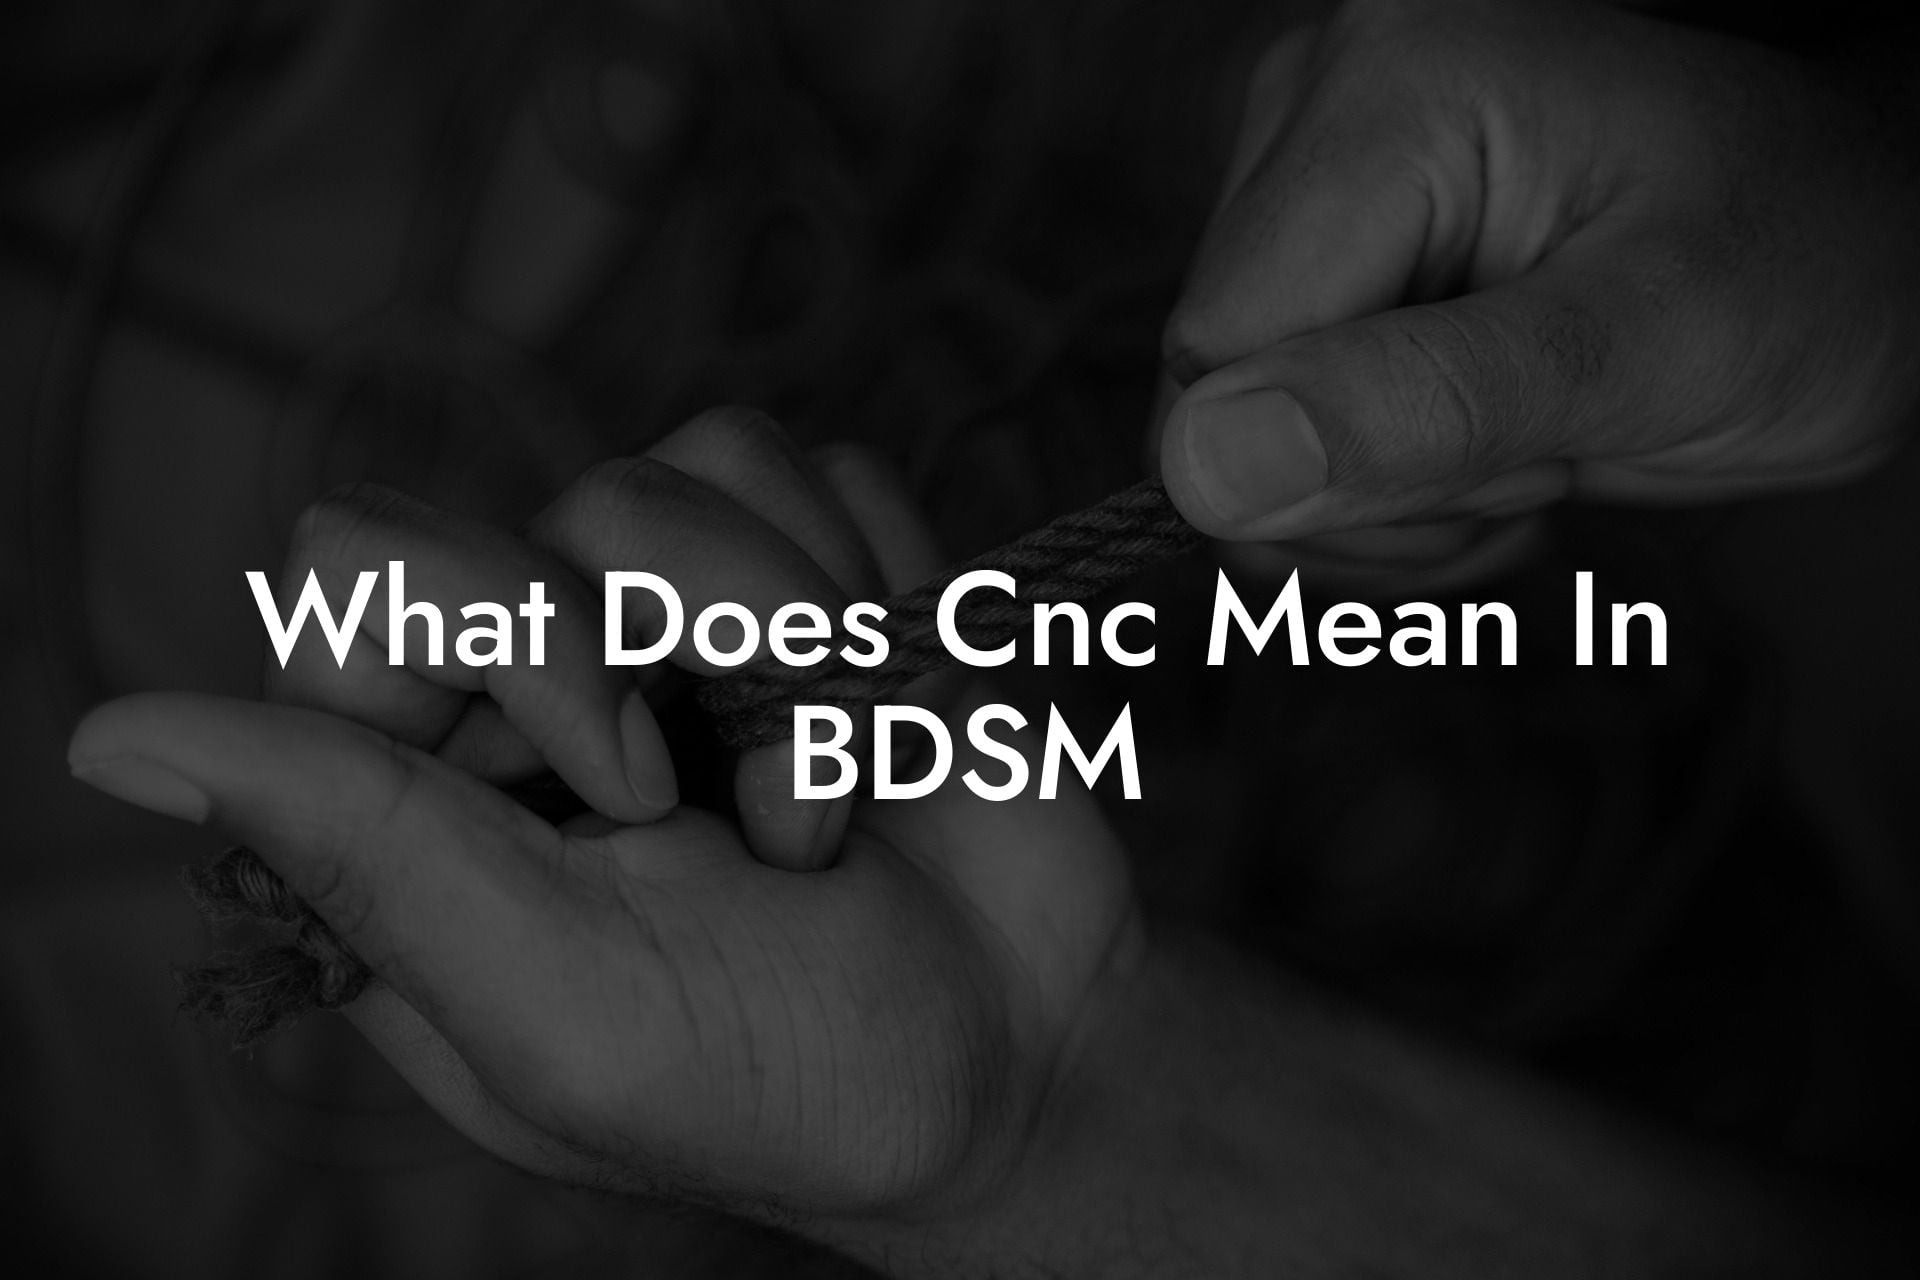 What Does Cnc Mean In BDSM